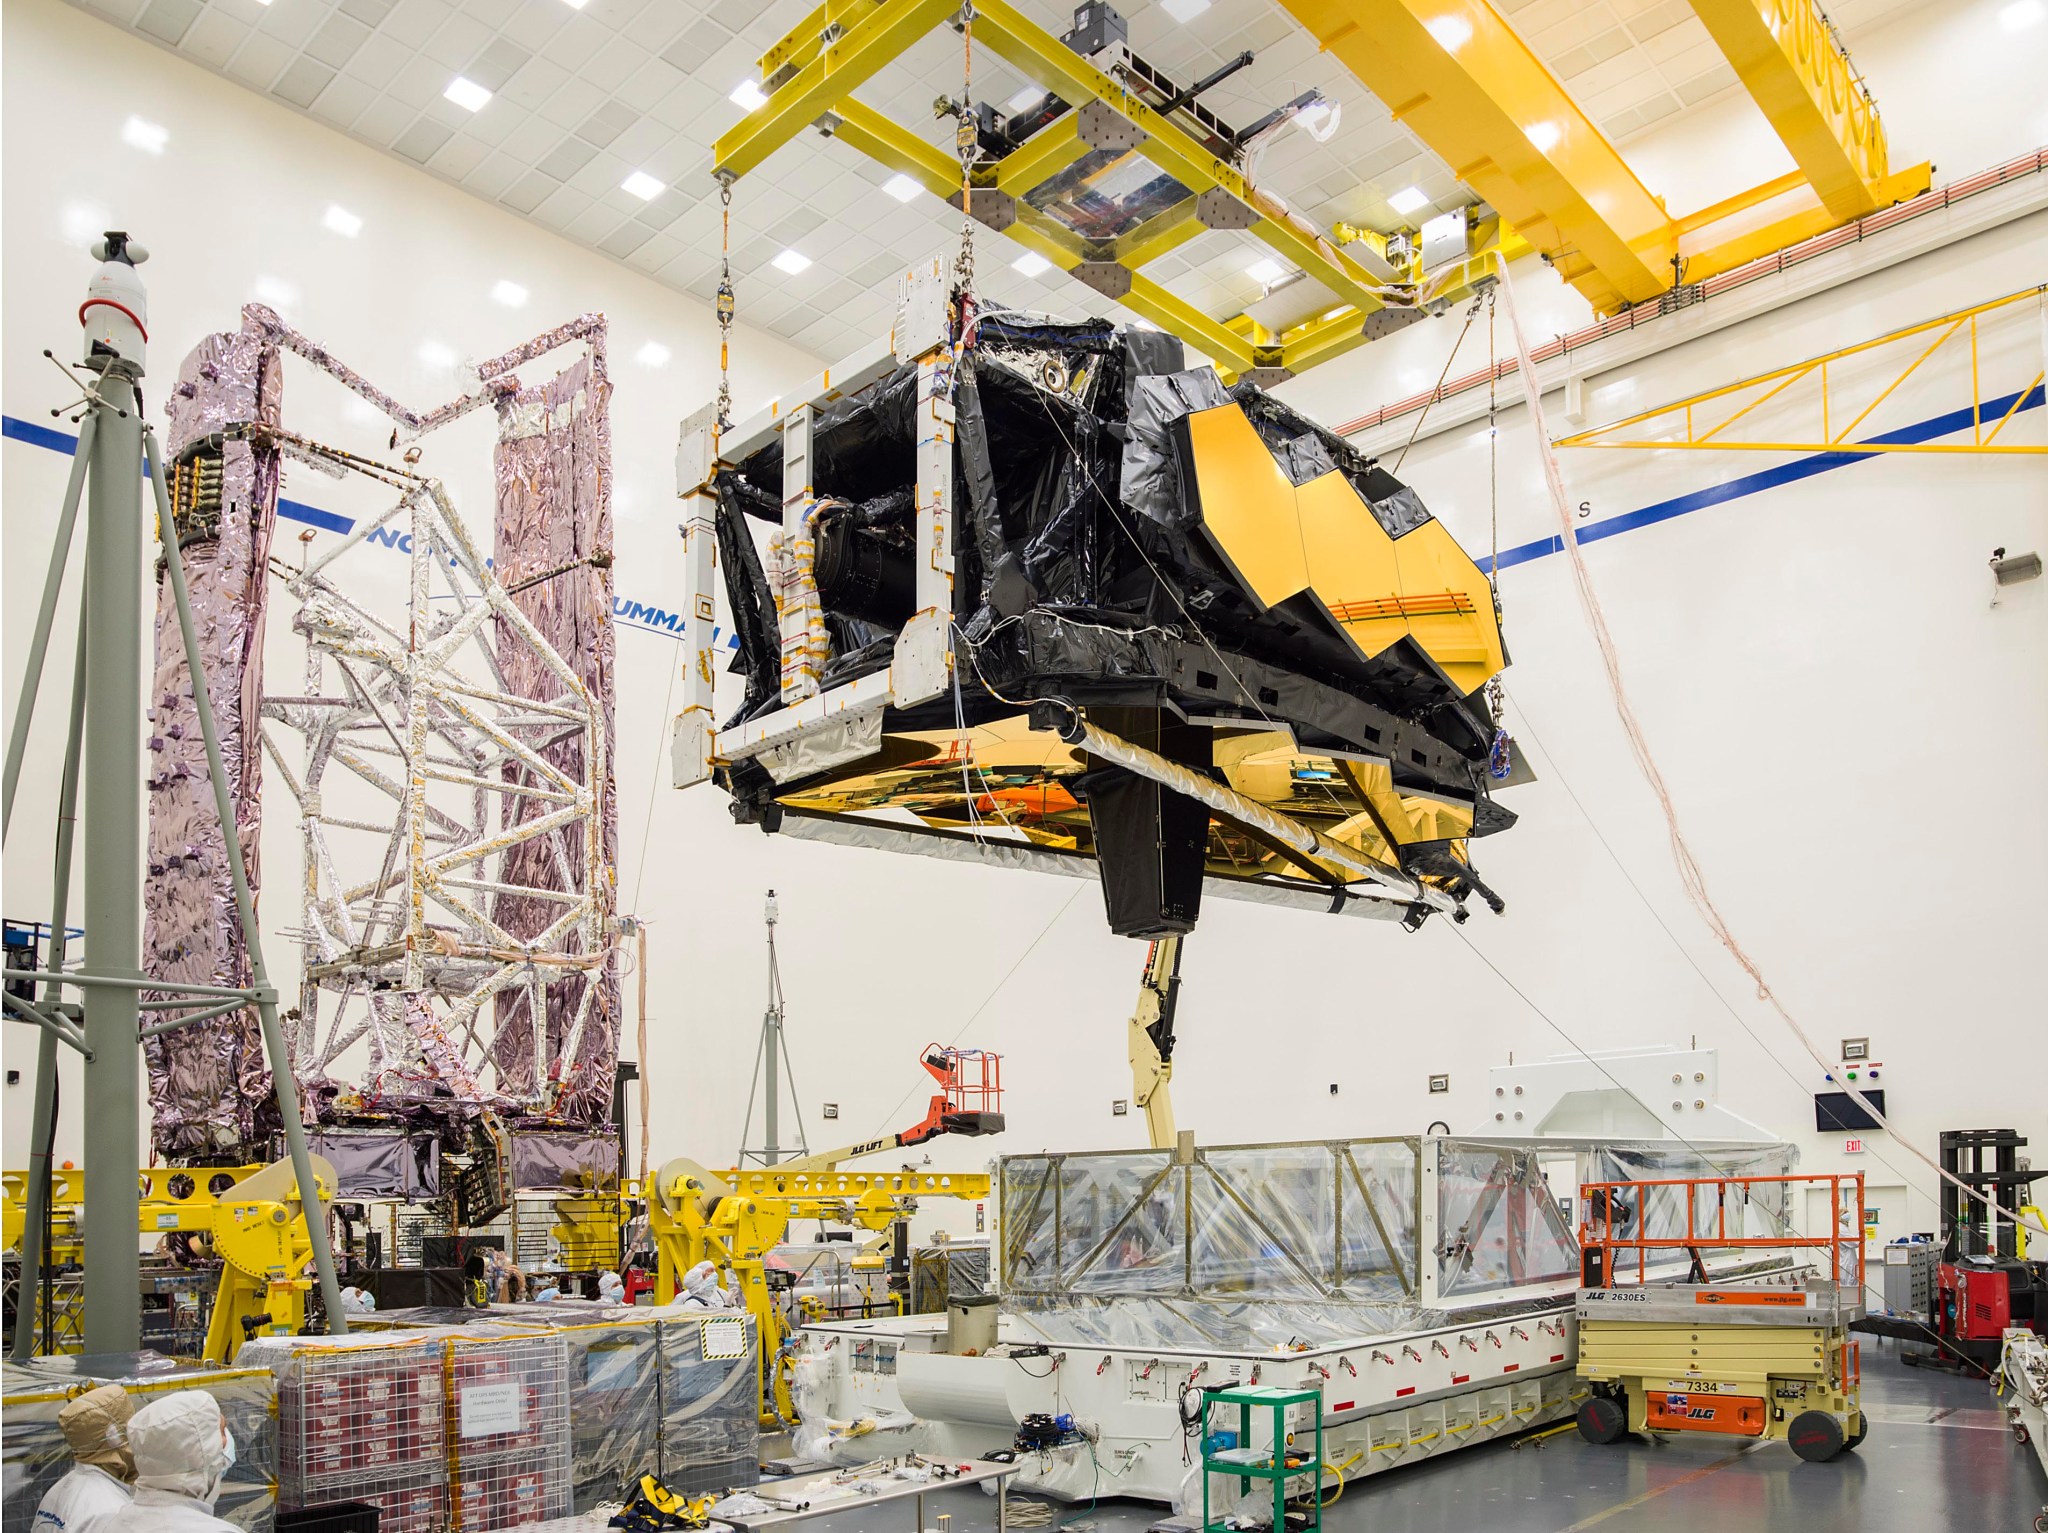 Engineers lift the combined optics and science instruments of NASA’s James Webb Space Telescope